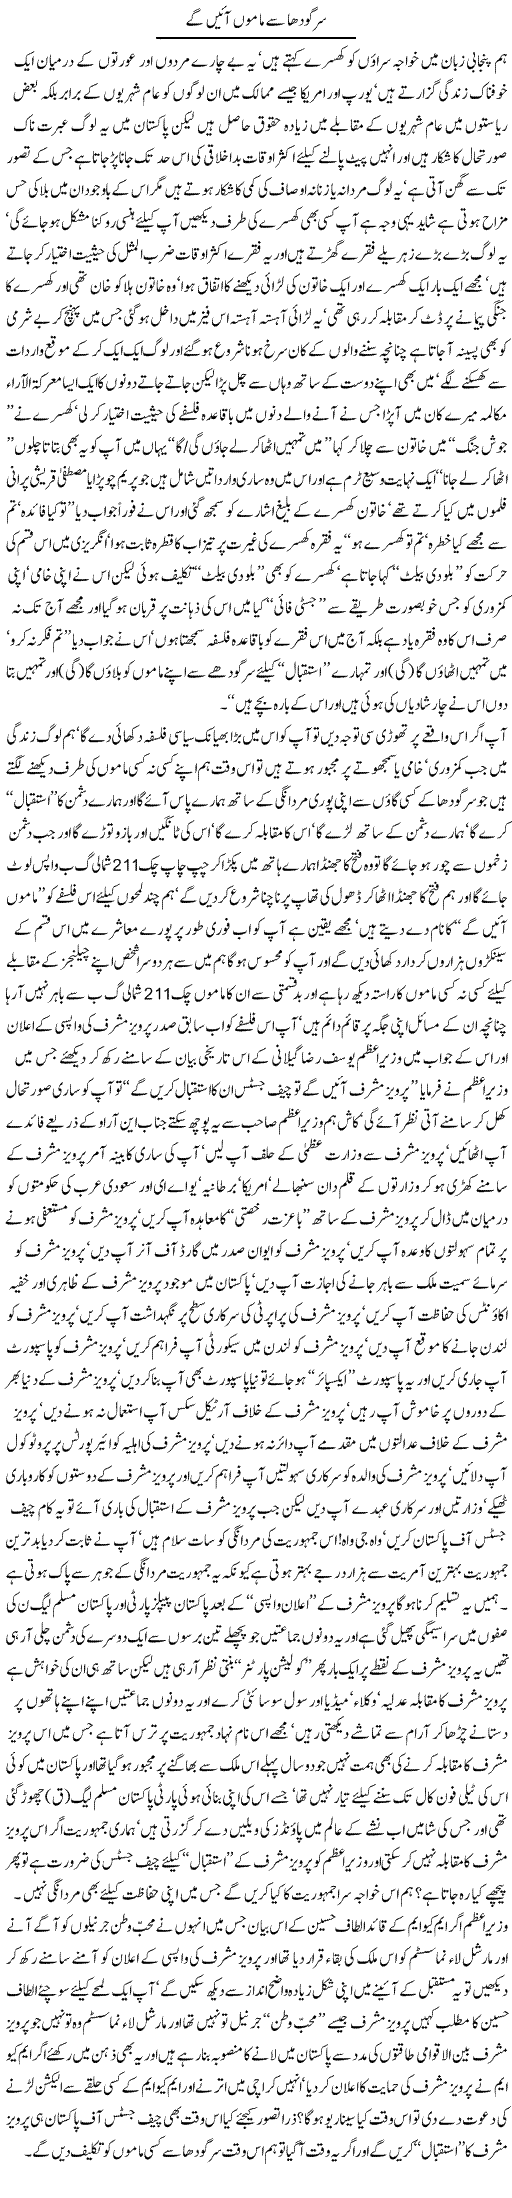 Uncle From Sargodha Express Column Javed Chaudhry 17 September 2010